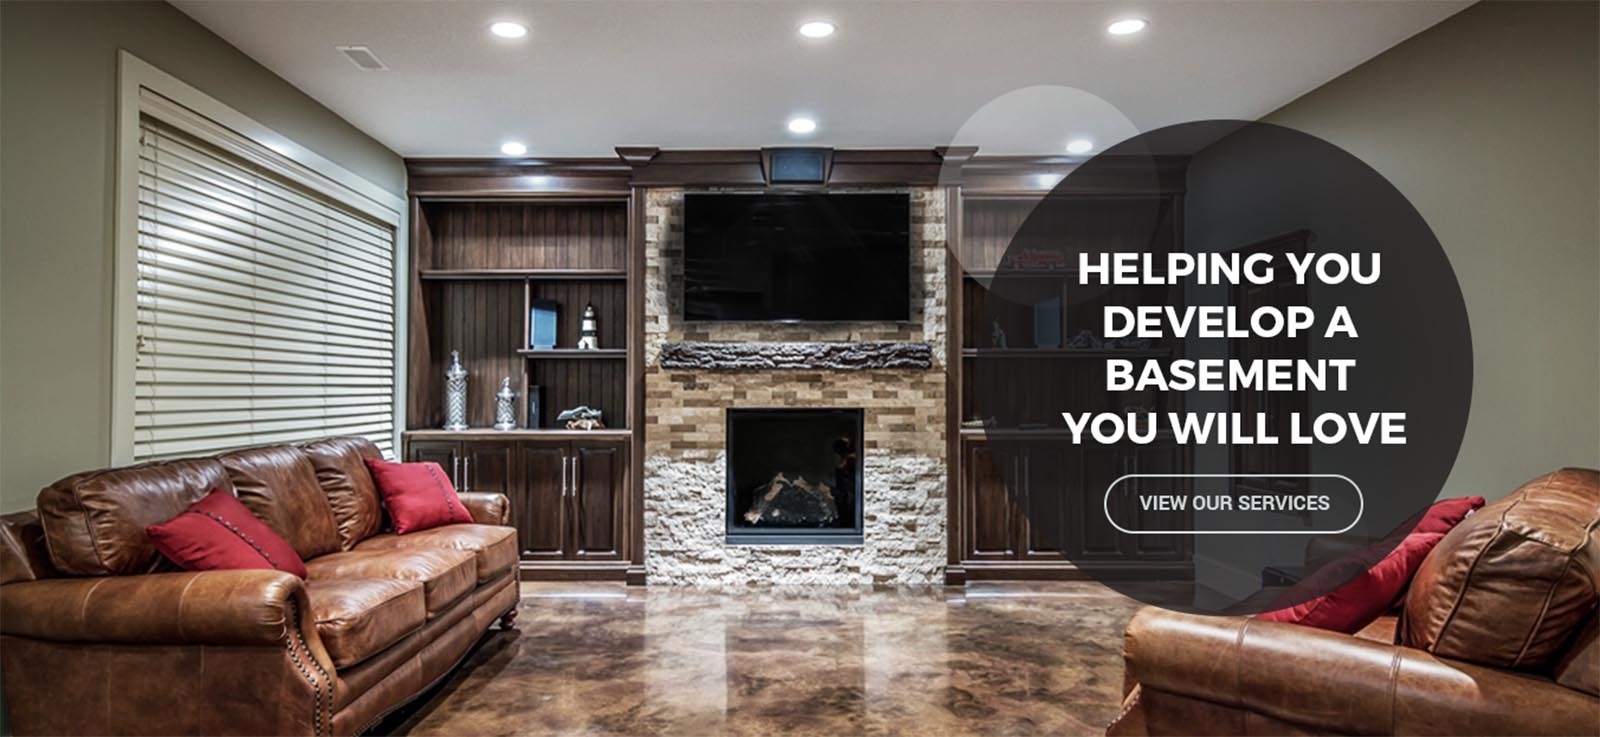 Our Services - Helping You Develop a Basement You will Love